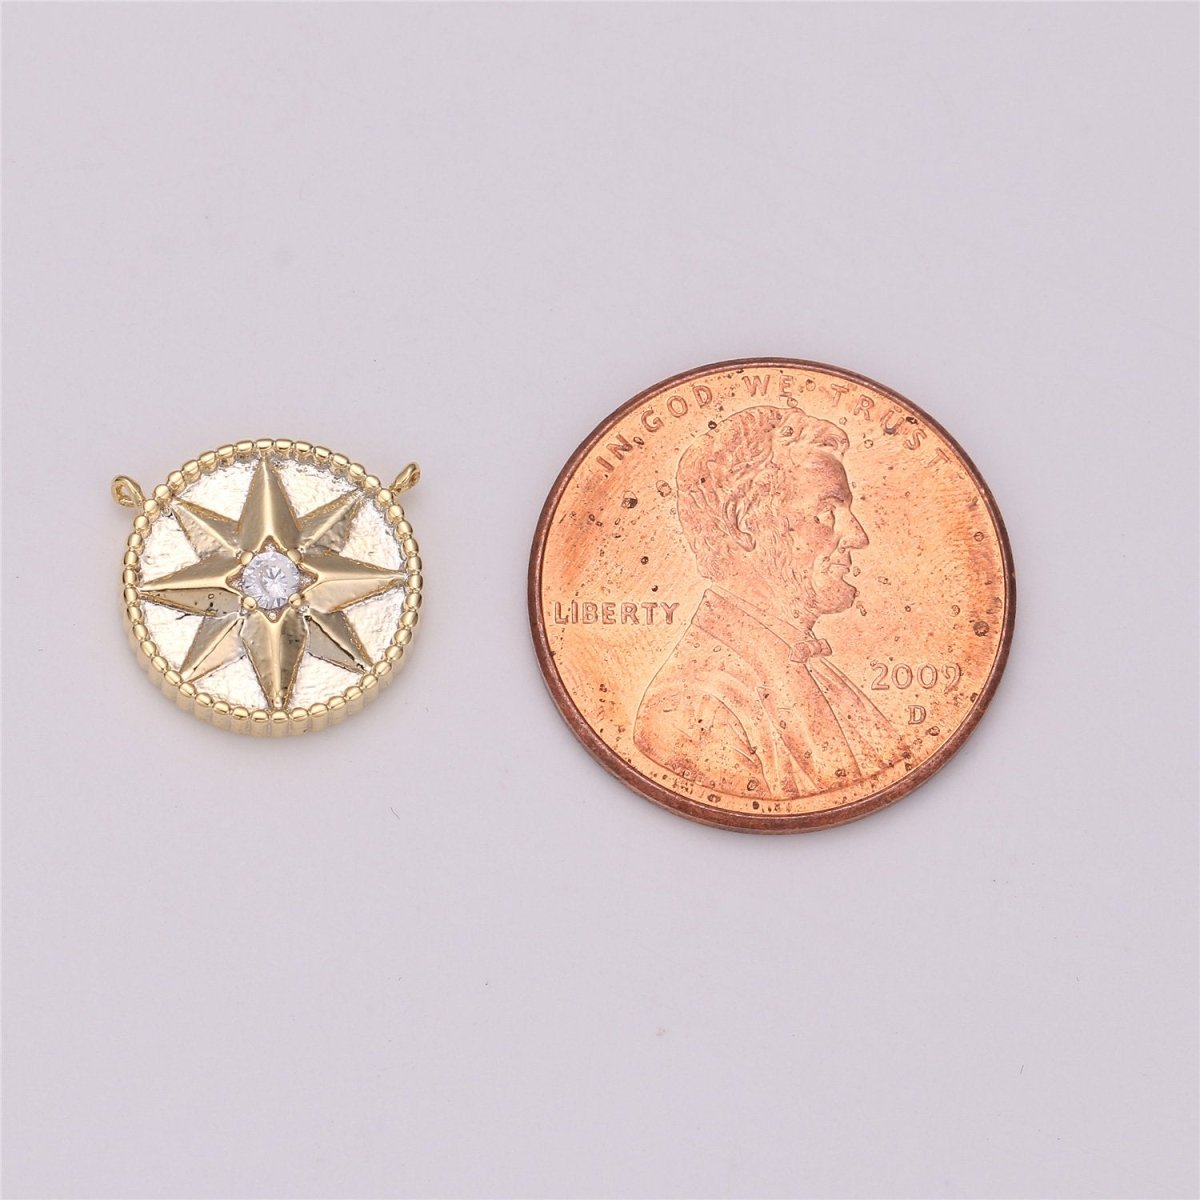 18k Gold Filled Star Coin Charm Celestial North Star Coin Pendant Tiny Small 12mm CZ Drop Charm Minimalist Jewelry Double Bail Pendant F-287 - DLUXCA